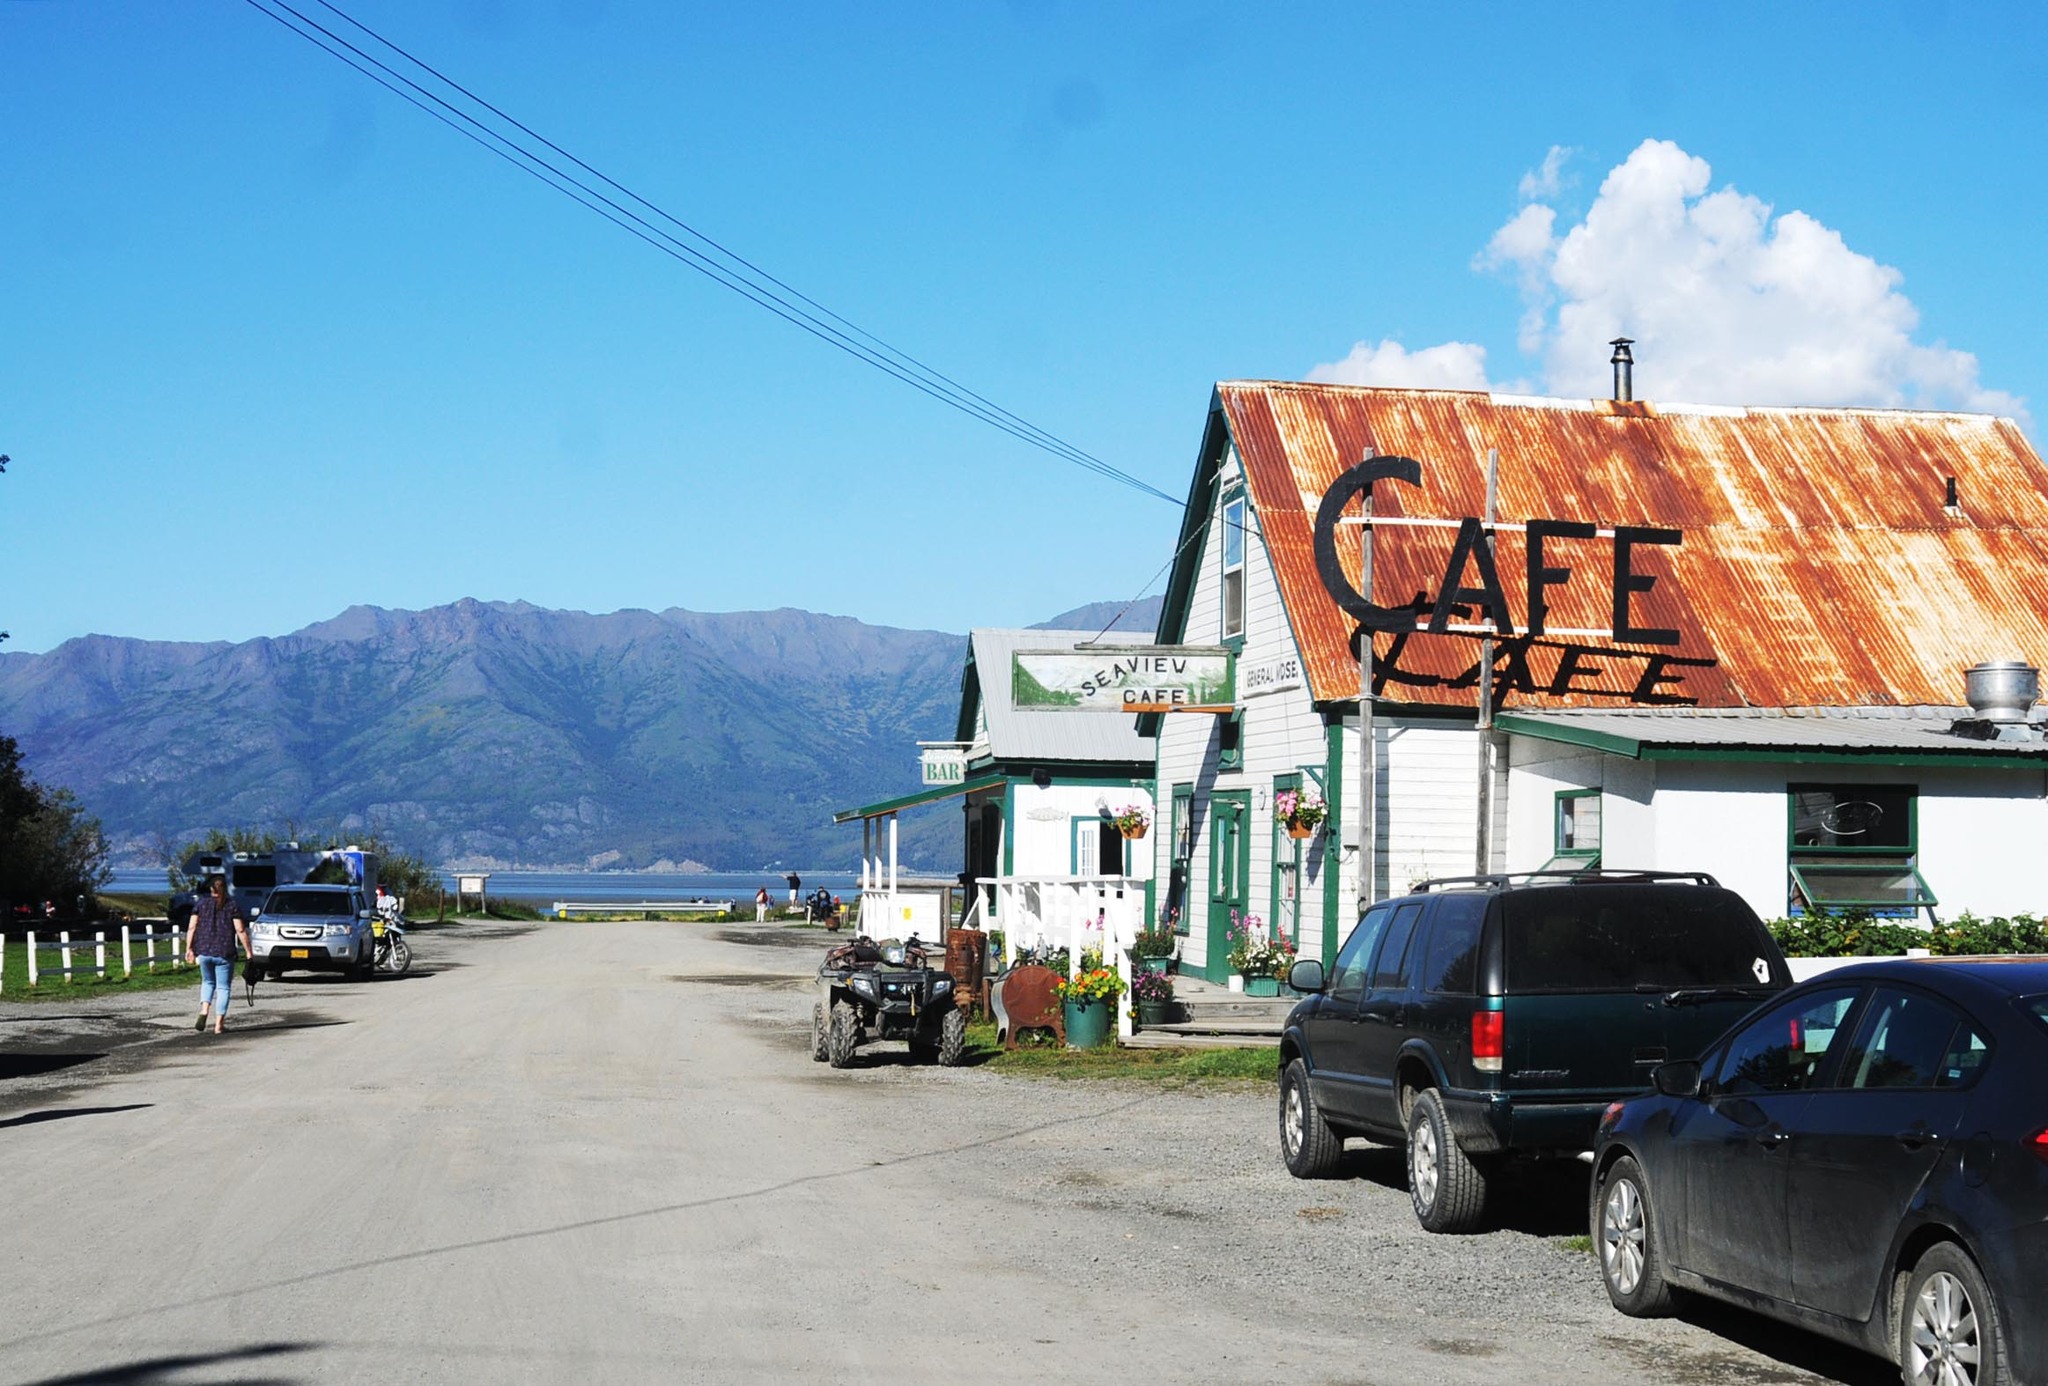 In this August 2016 picture, people walk along the main historic downtown street of Hope, Alaska. Hope, a small unincorporated town along the Turnagain Arm at the end of the 18-mile Hope Highway, is a popular tourist destination in the summer months for its hiking and boating opportunities and for its historical value. (Elizabeth Earl/Peninsula Clarion)